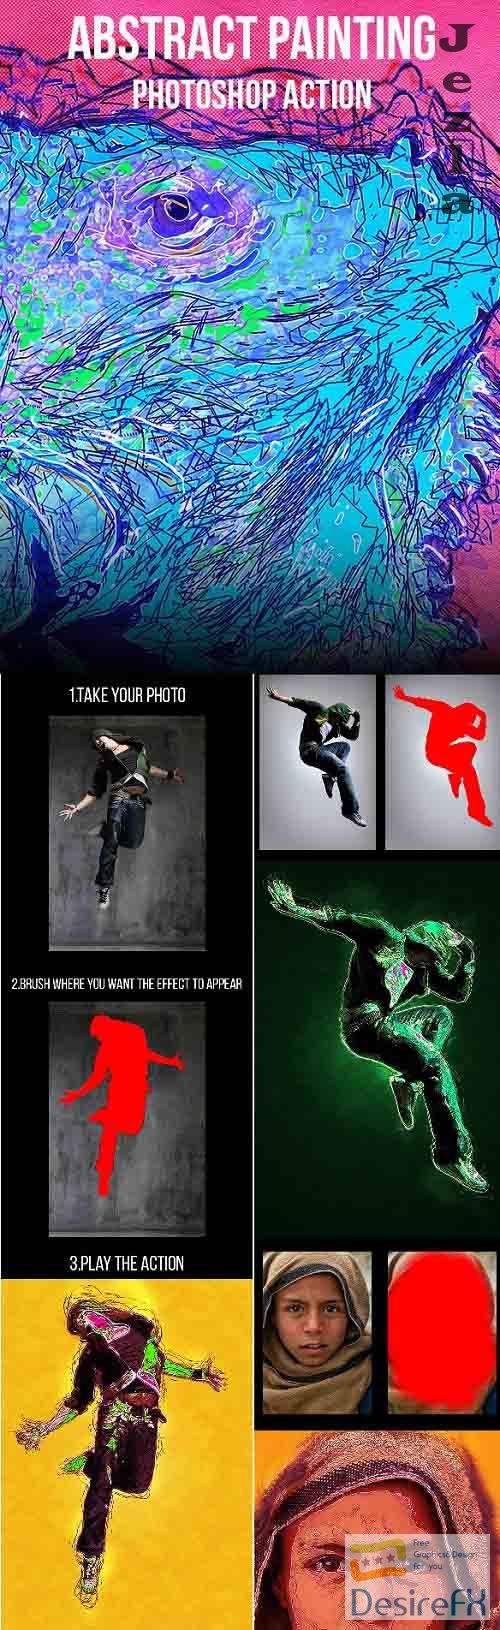 Abstract Painting Photoshop Action 11067430